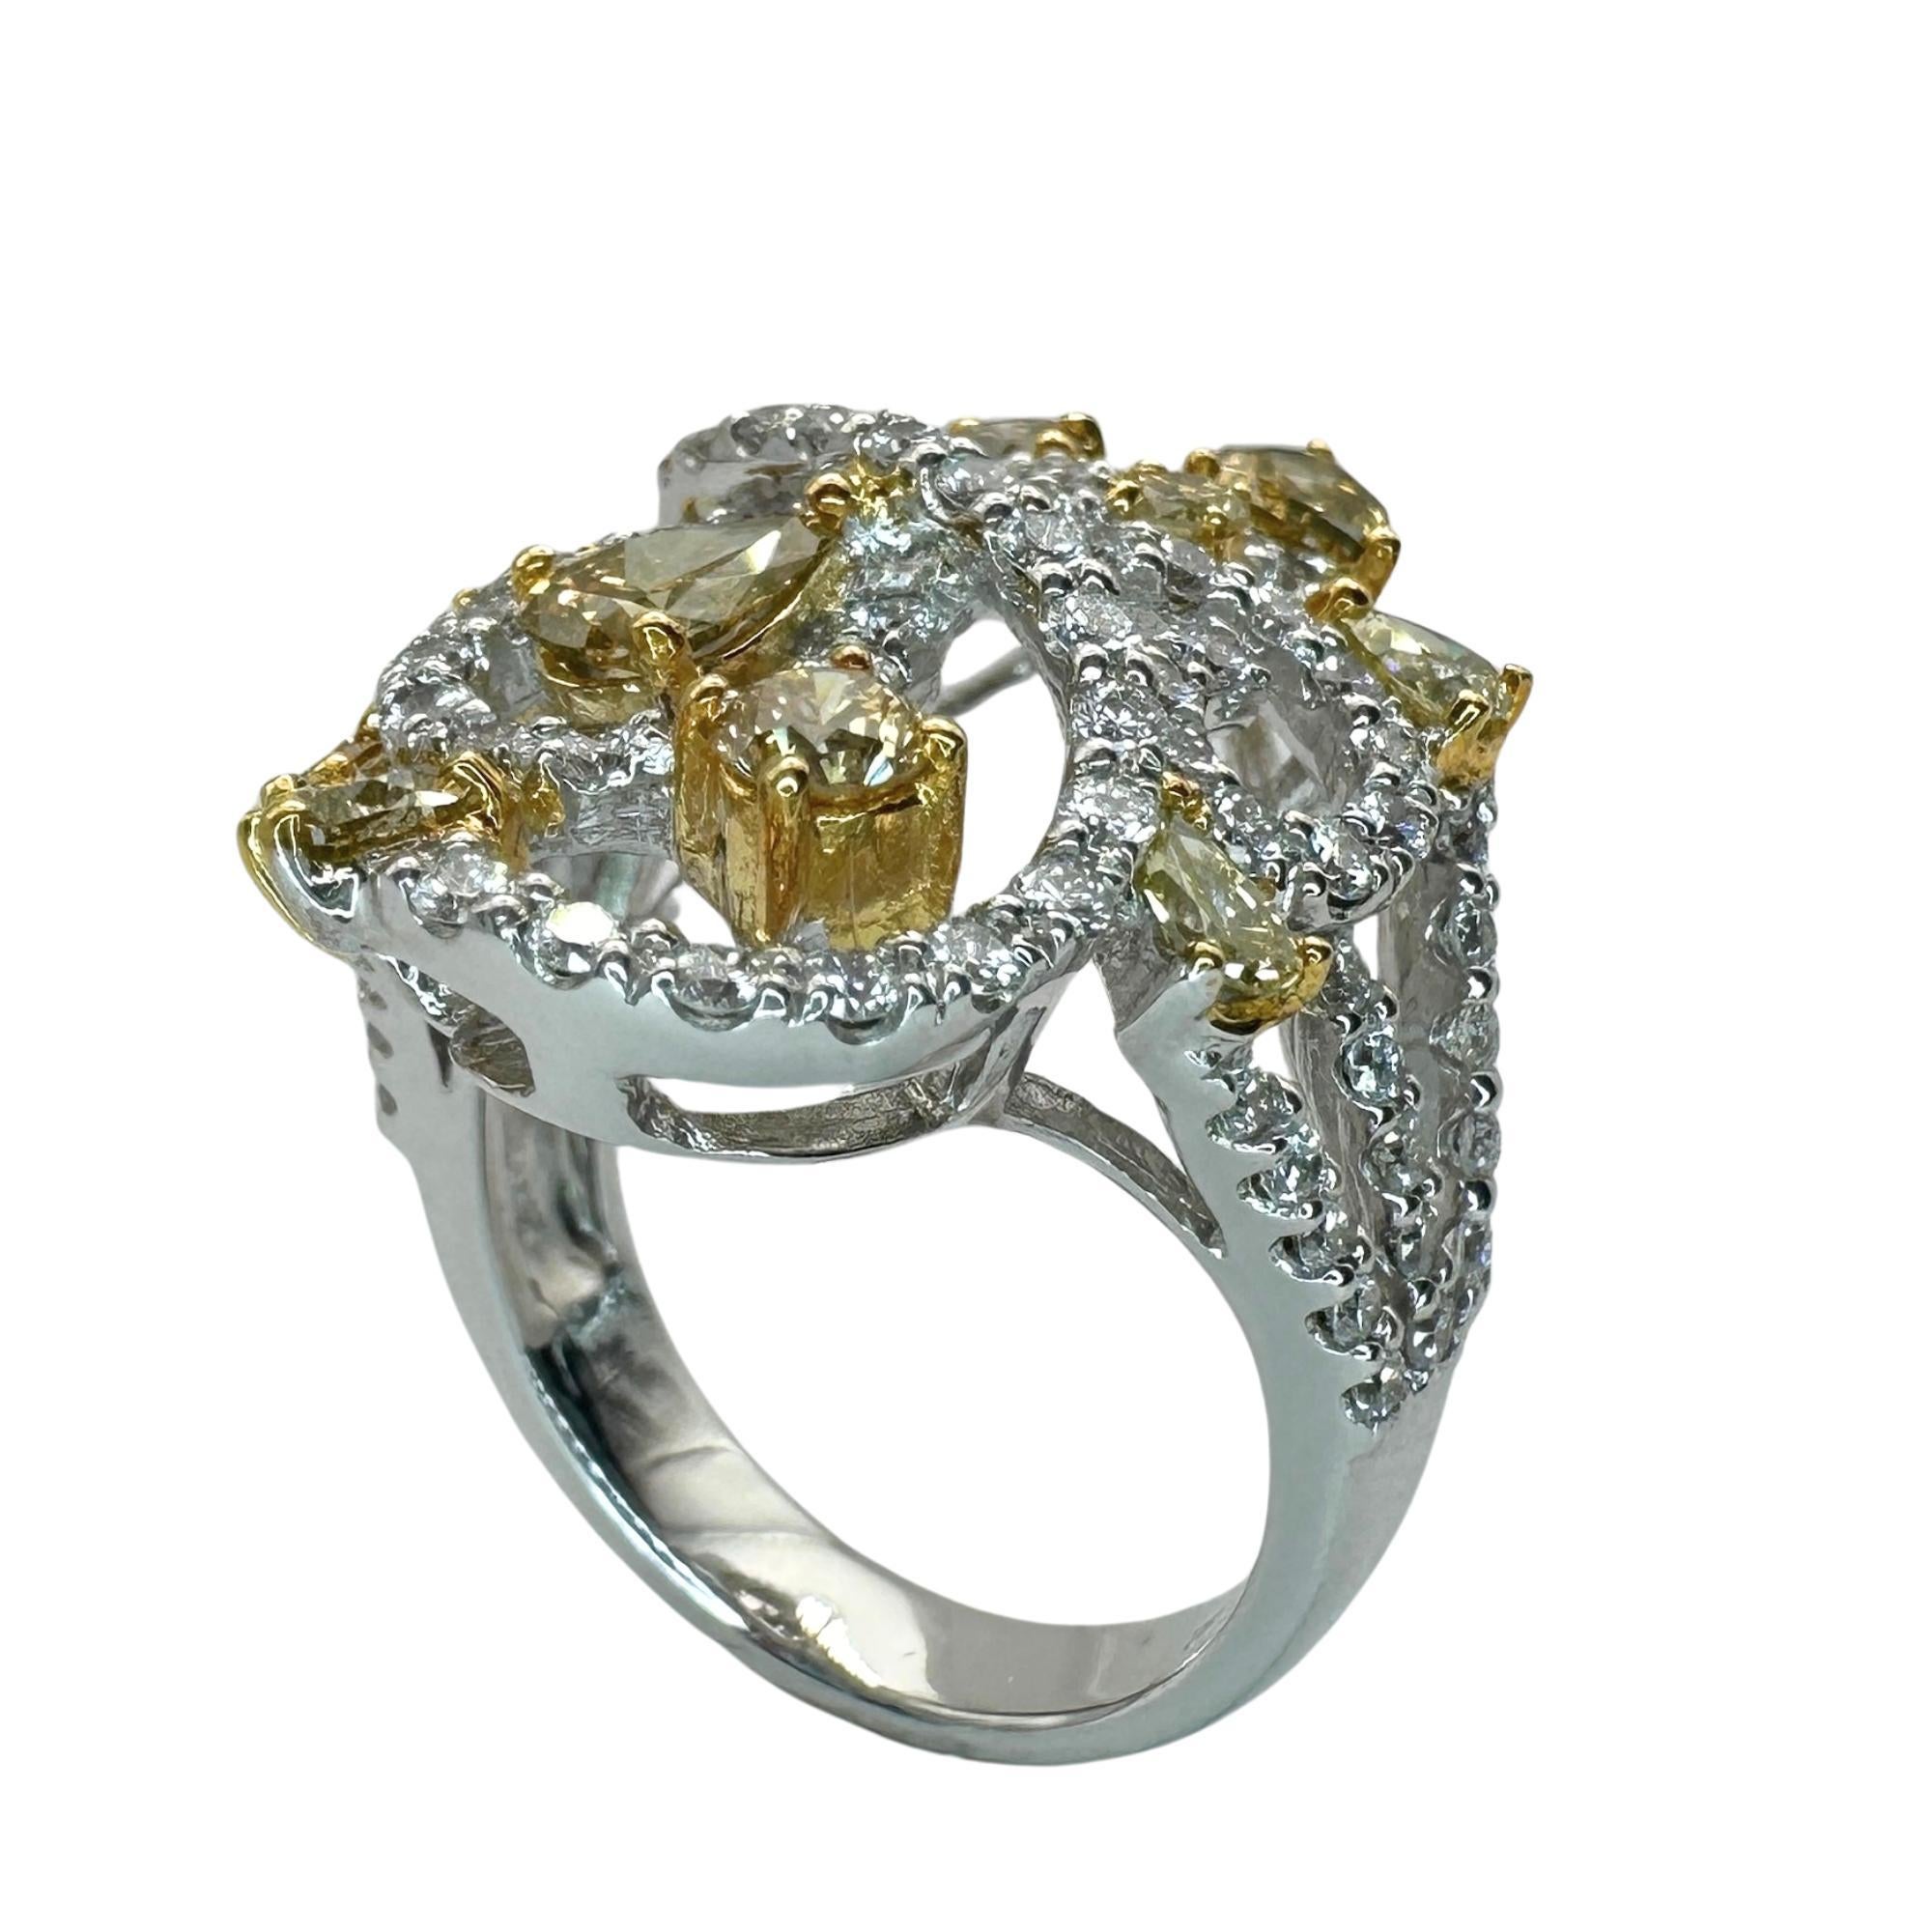 Elevate your style with our 18k Yellow and White Diamond Ring. Weighing 7.2 grams and sized at 6.5, it features stunning 1.76 carats of yellow diamonds and gracefully complemented by 1.45 carats of white diamonds. A timeless blend of sophistication